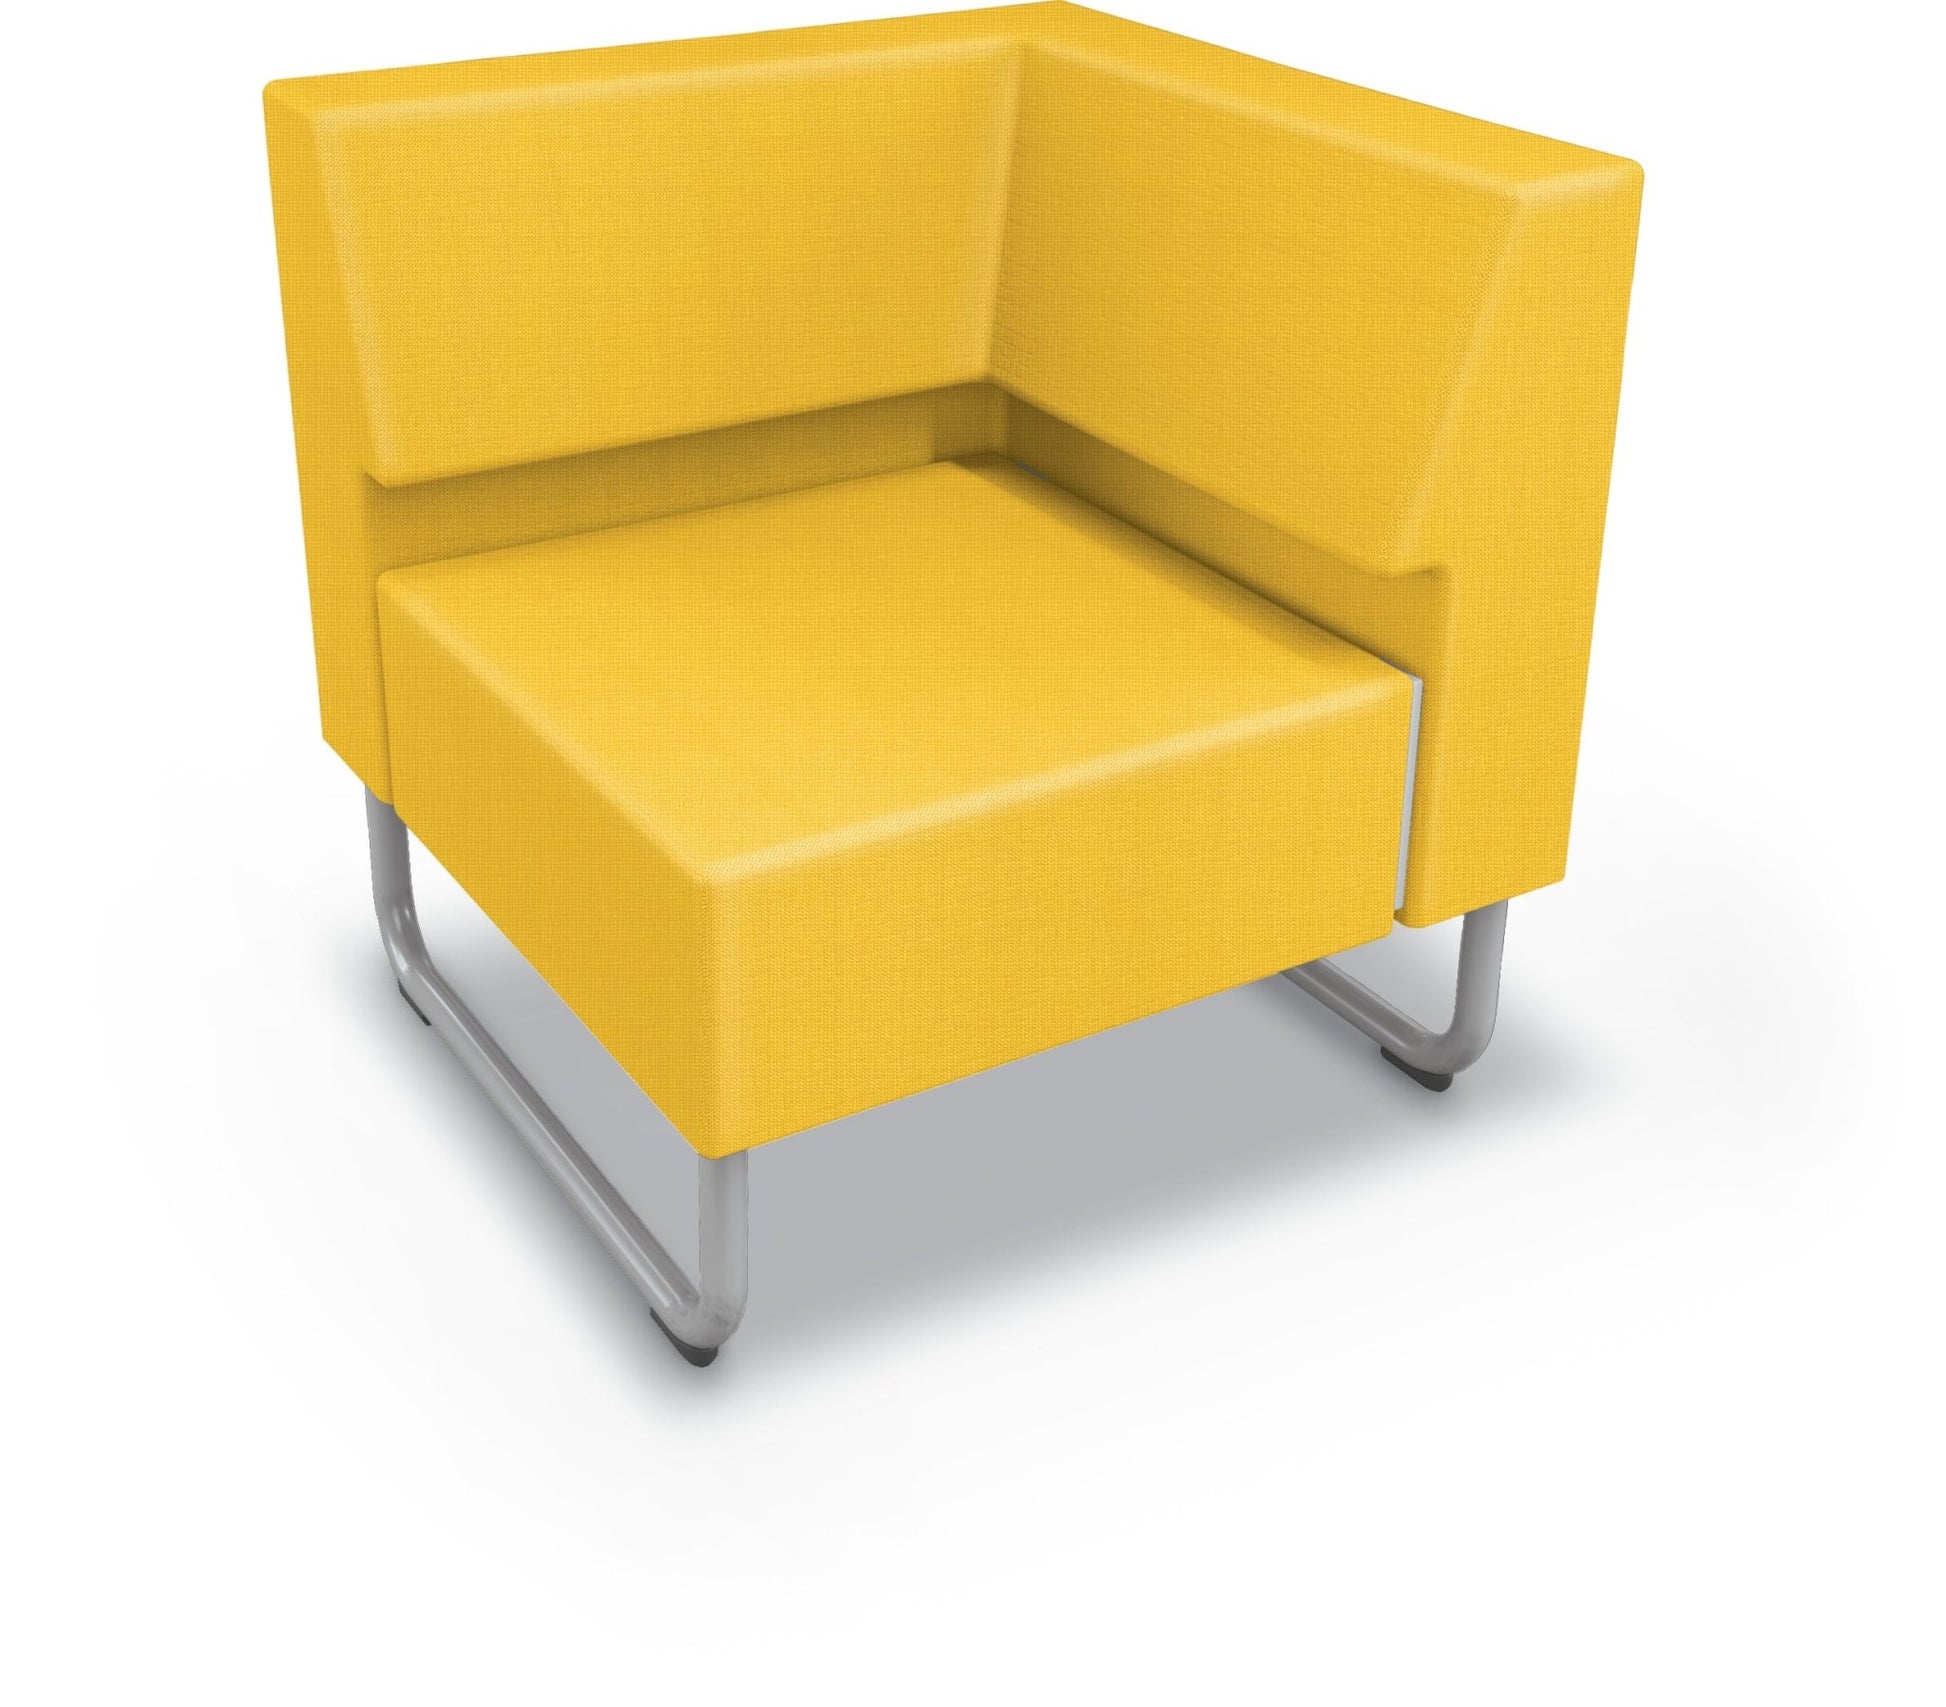 Mooreco Akt Soft Seating Lounge Corner Chair - Grade 02 Fabric and Powder Coated Sled Legs - SchoolOutlet